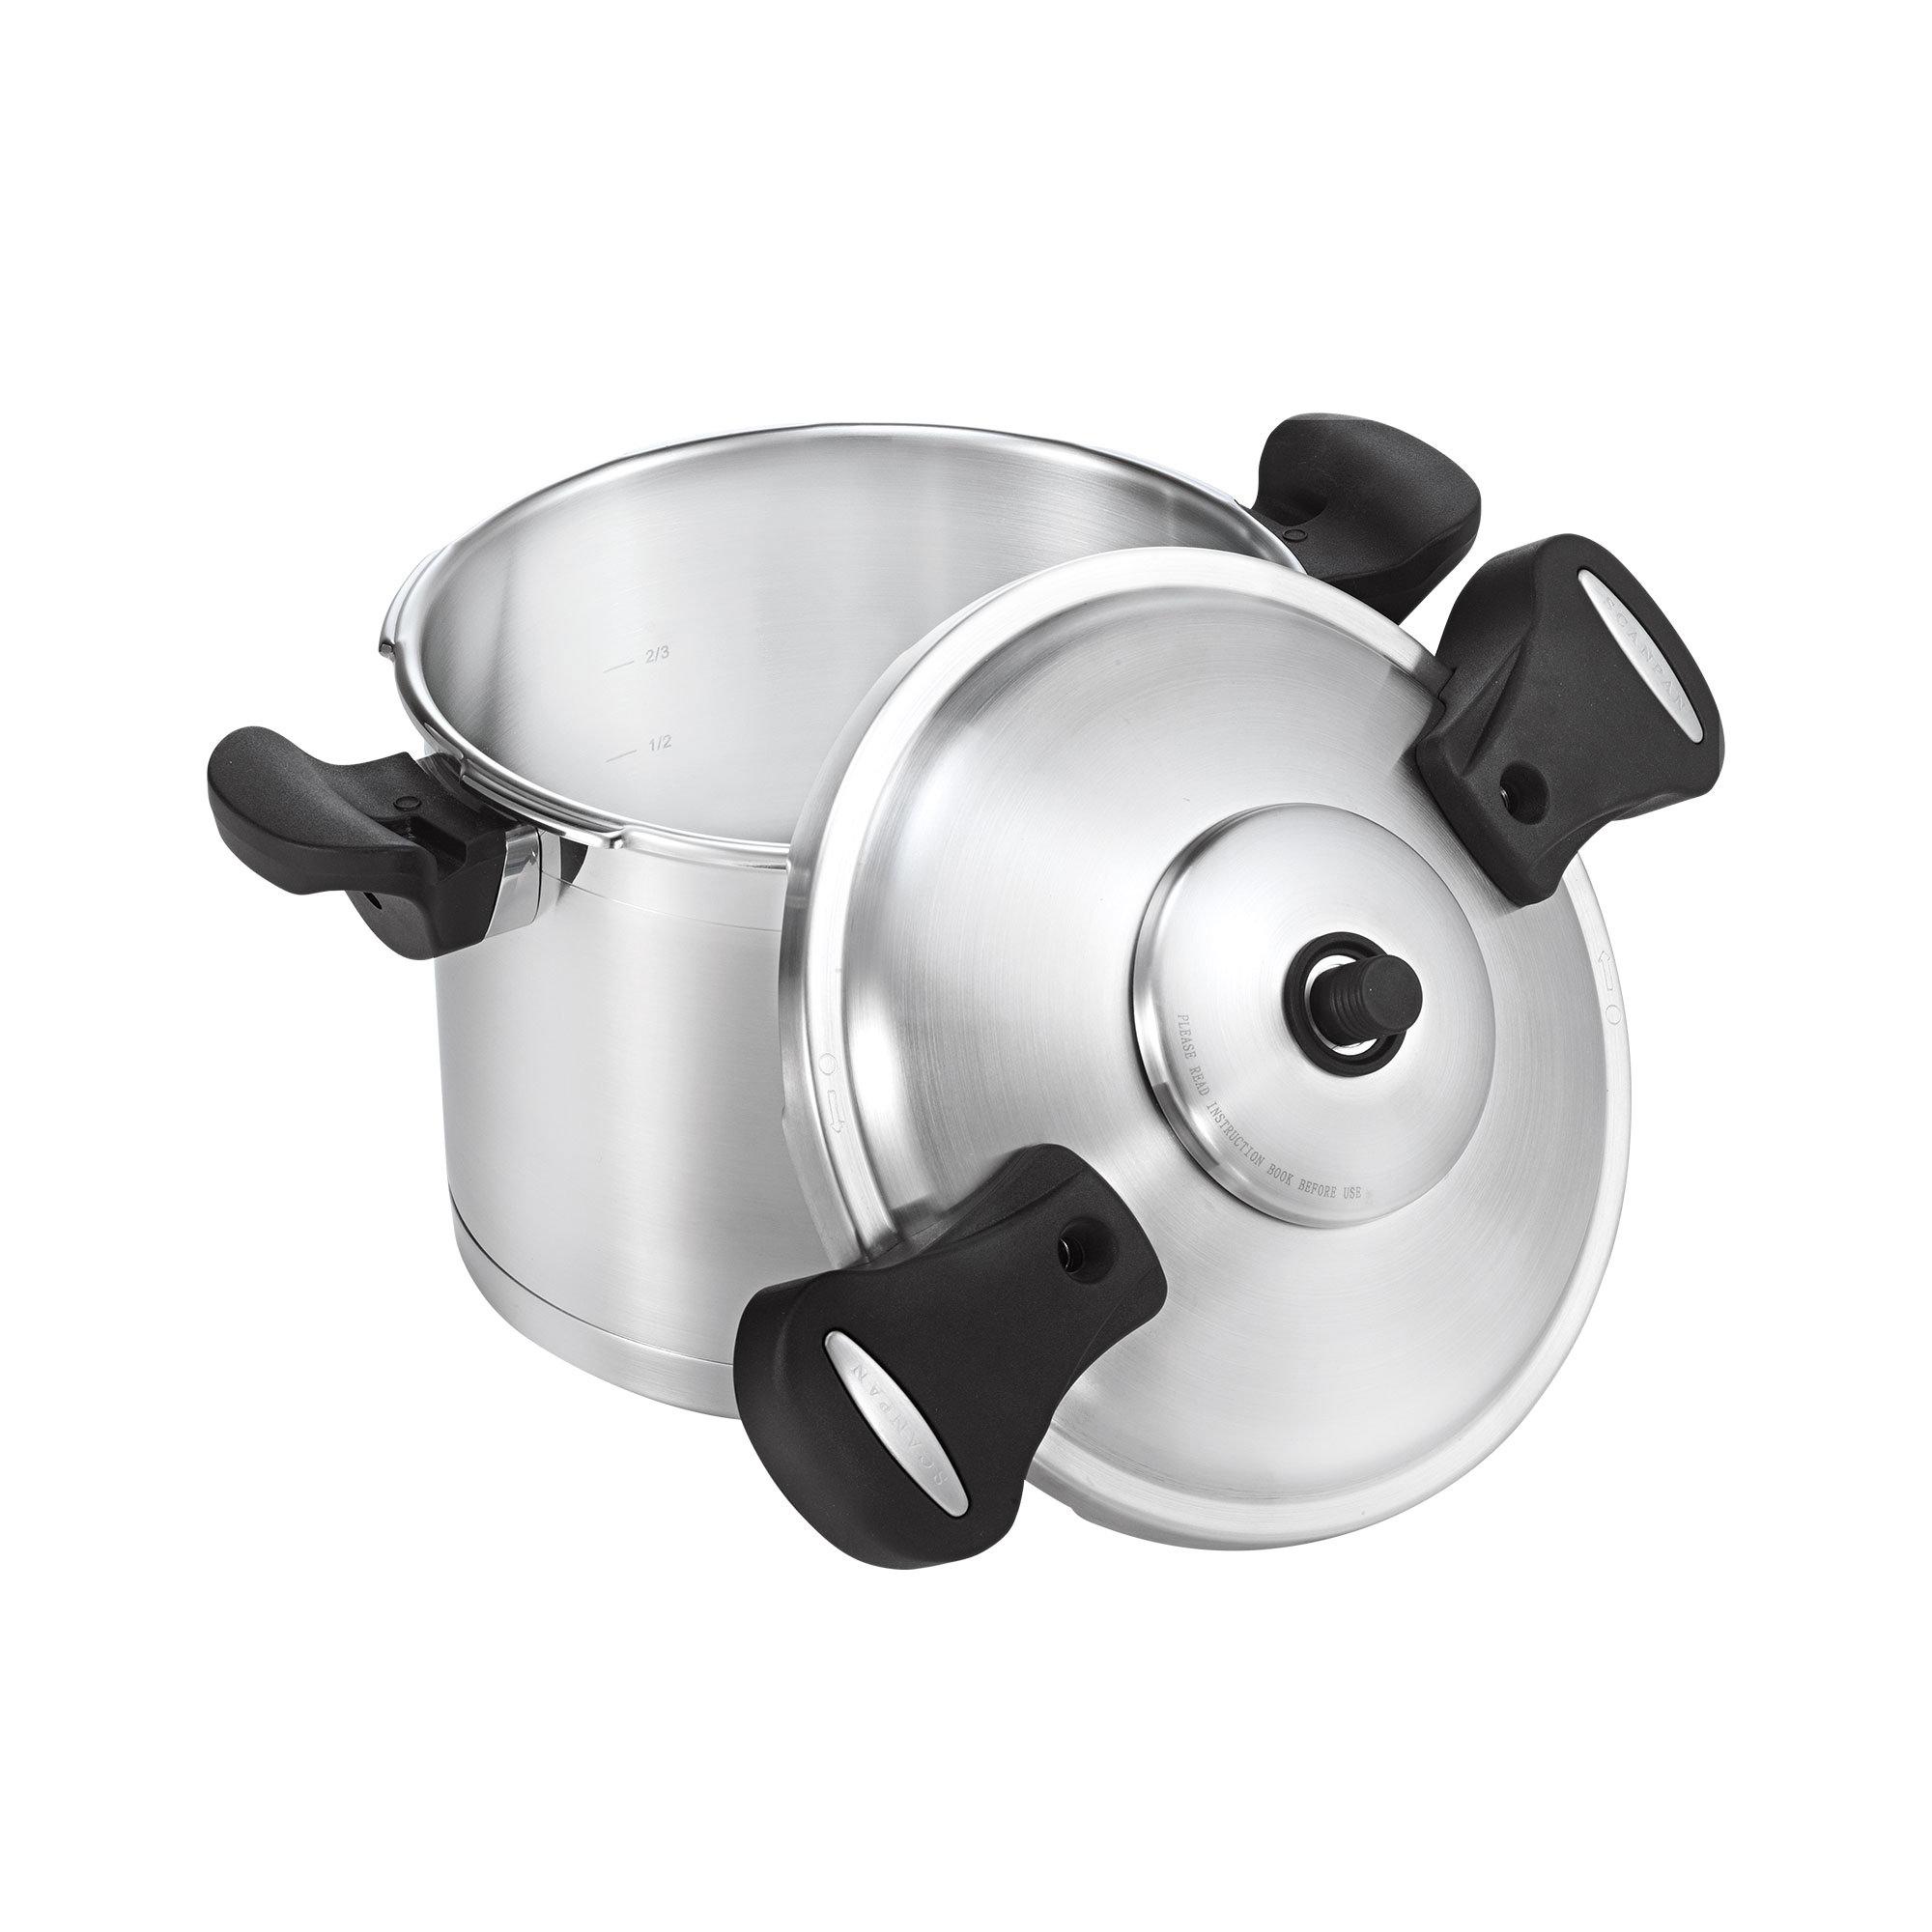 Scanpan Stainless Steel Pressure Cooker 22cm - 6L Image 1